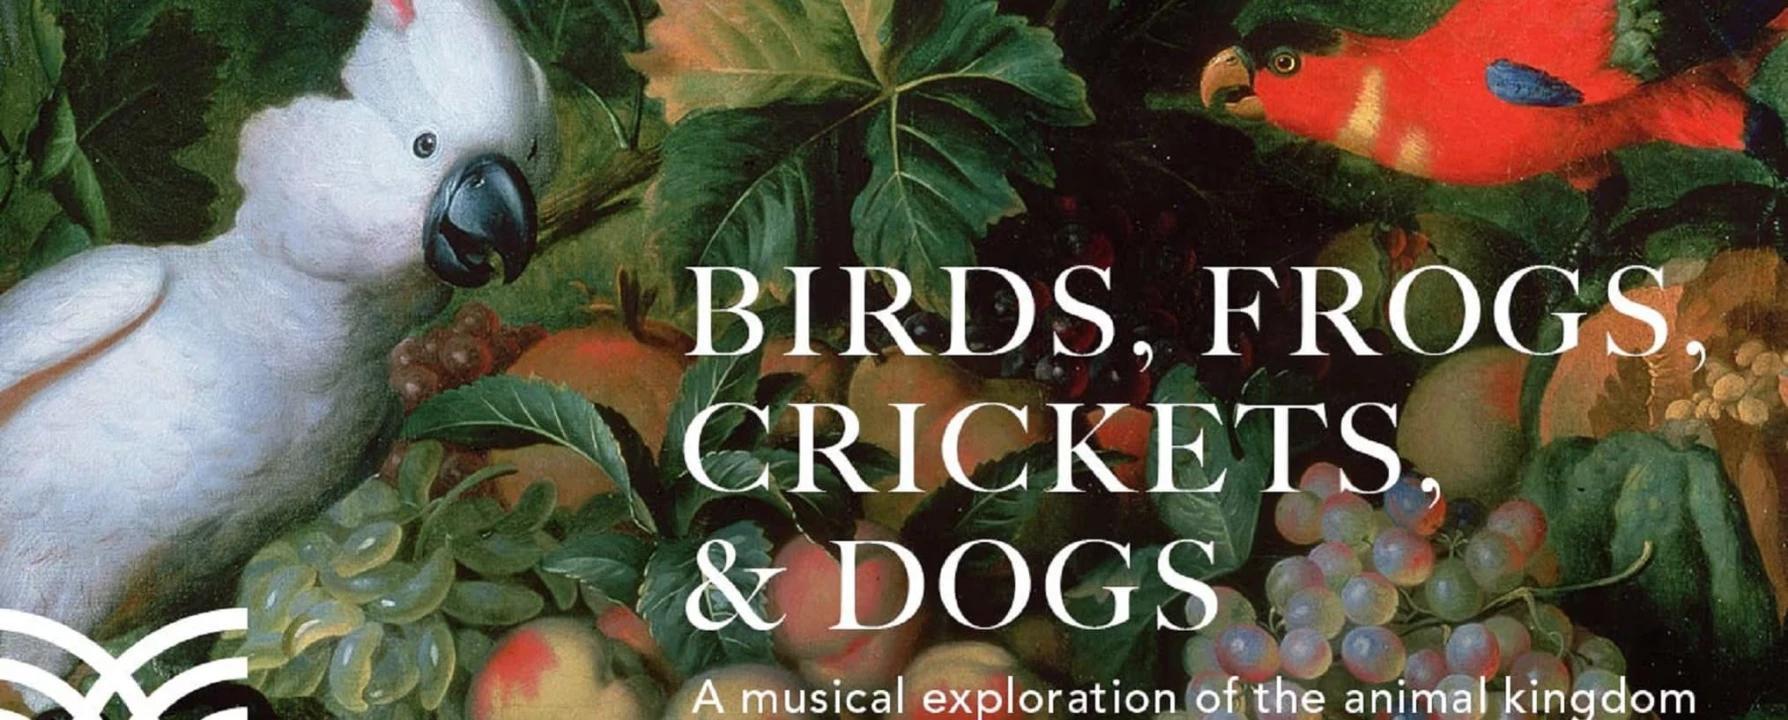 Music of the Baroque: Birds, Frogs, Crickets, & Dogs: What to expect - 1